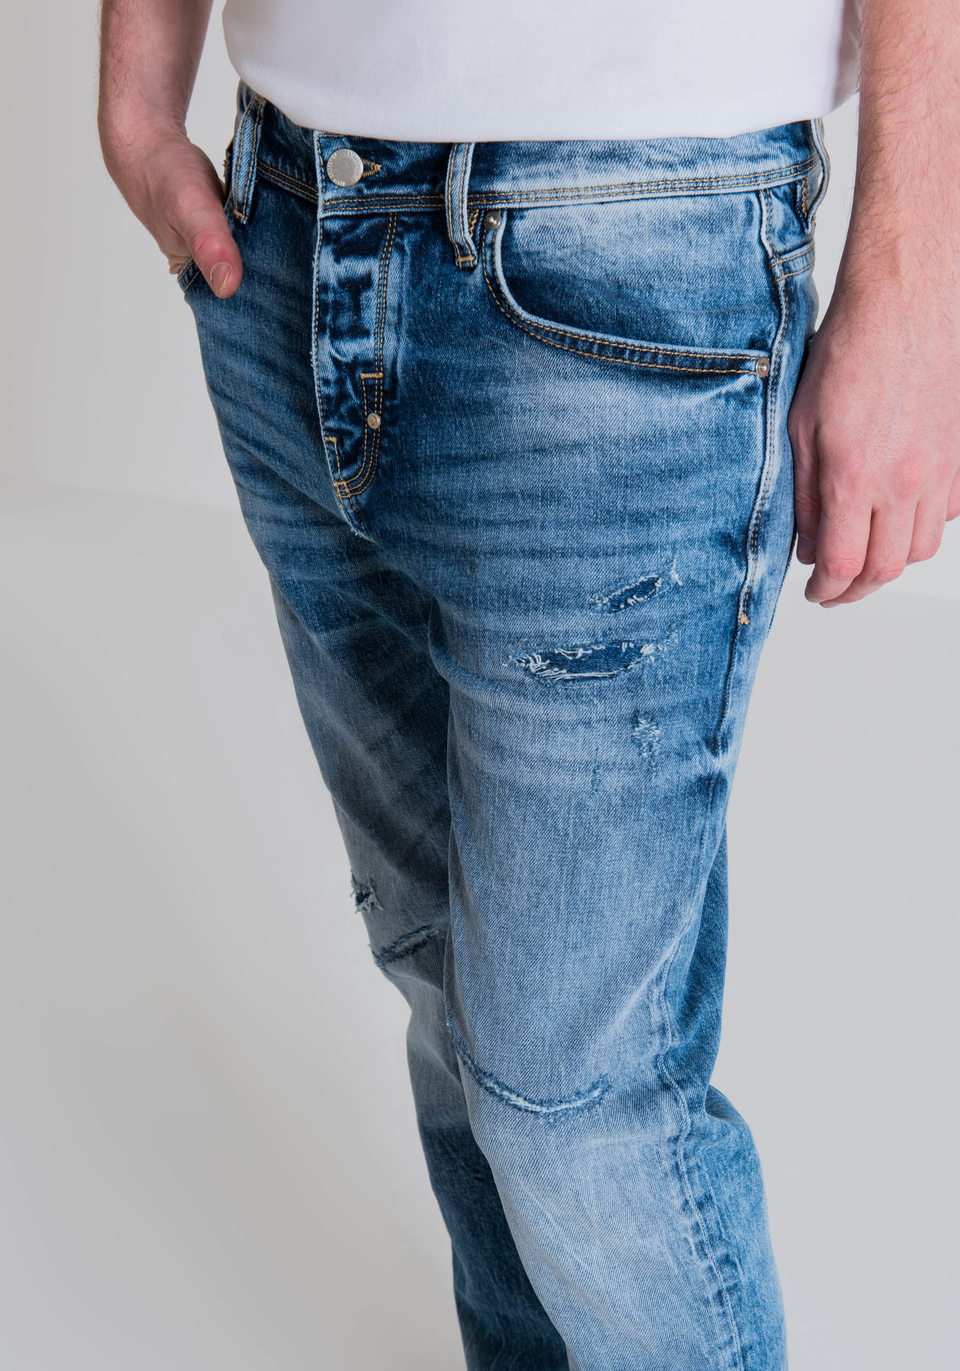 "ARGON" SLIM FIT ANKLE JEANS IN COMFORT DENIM WITH MEDIUM WASH AND ABRASIONS - Antony Morato Online Shop